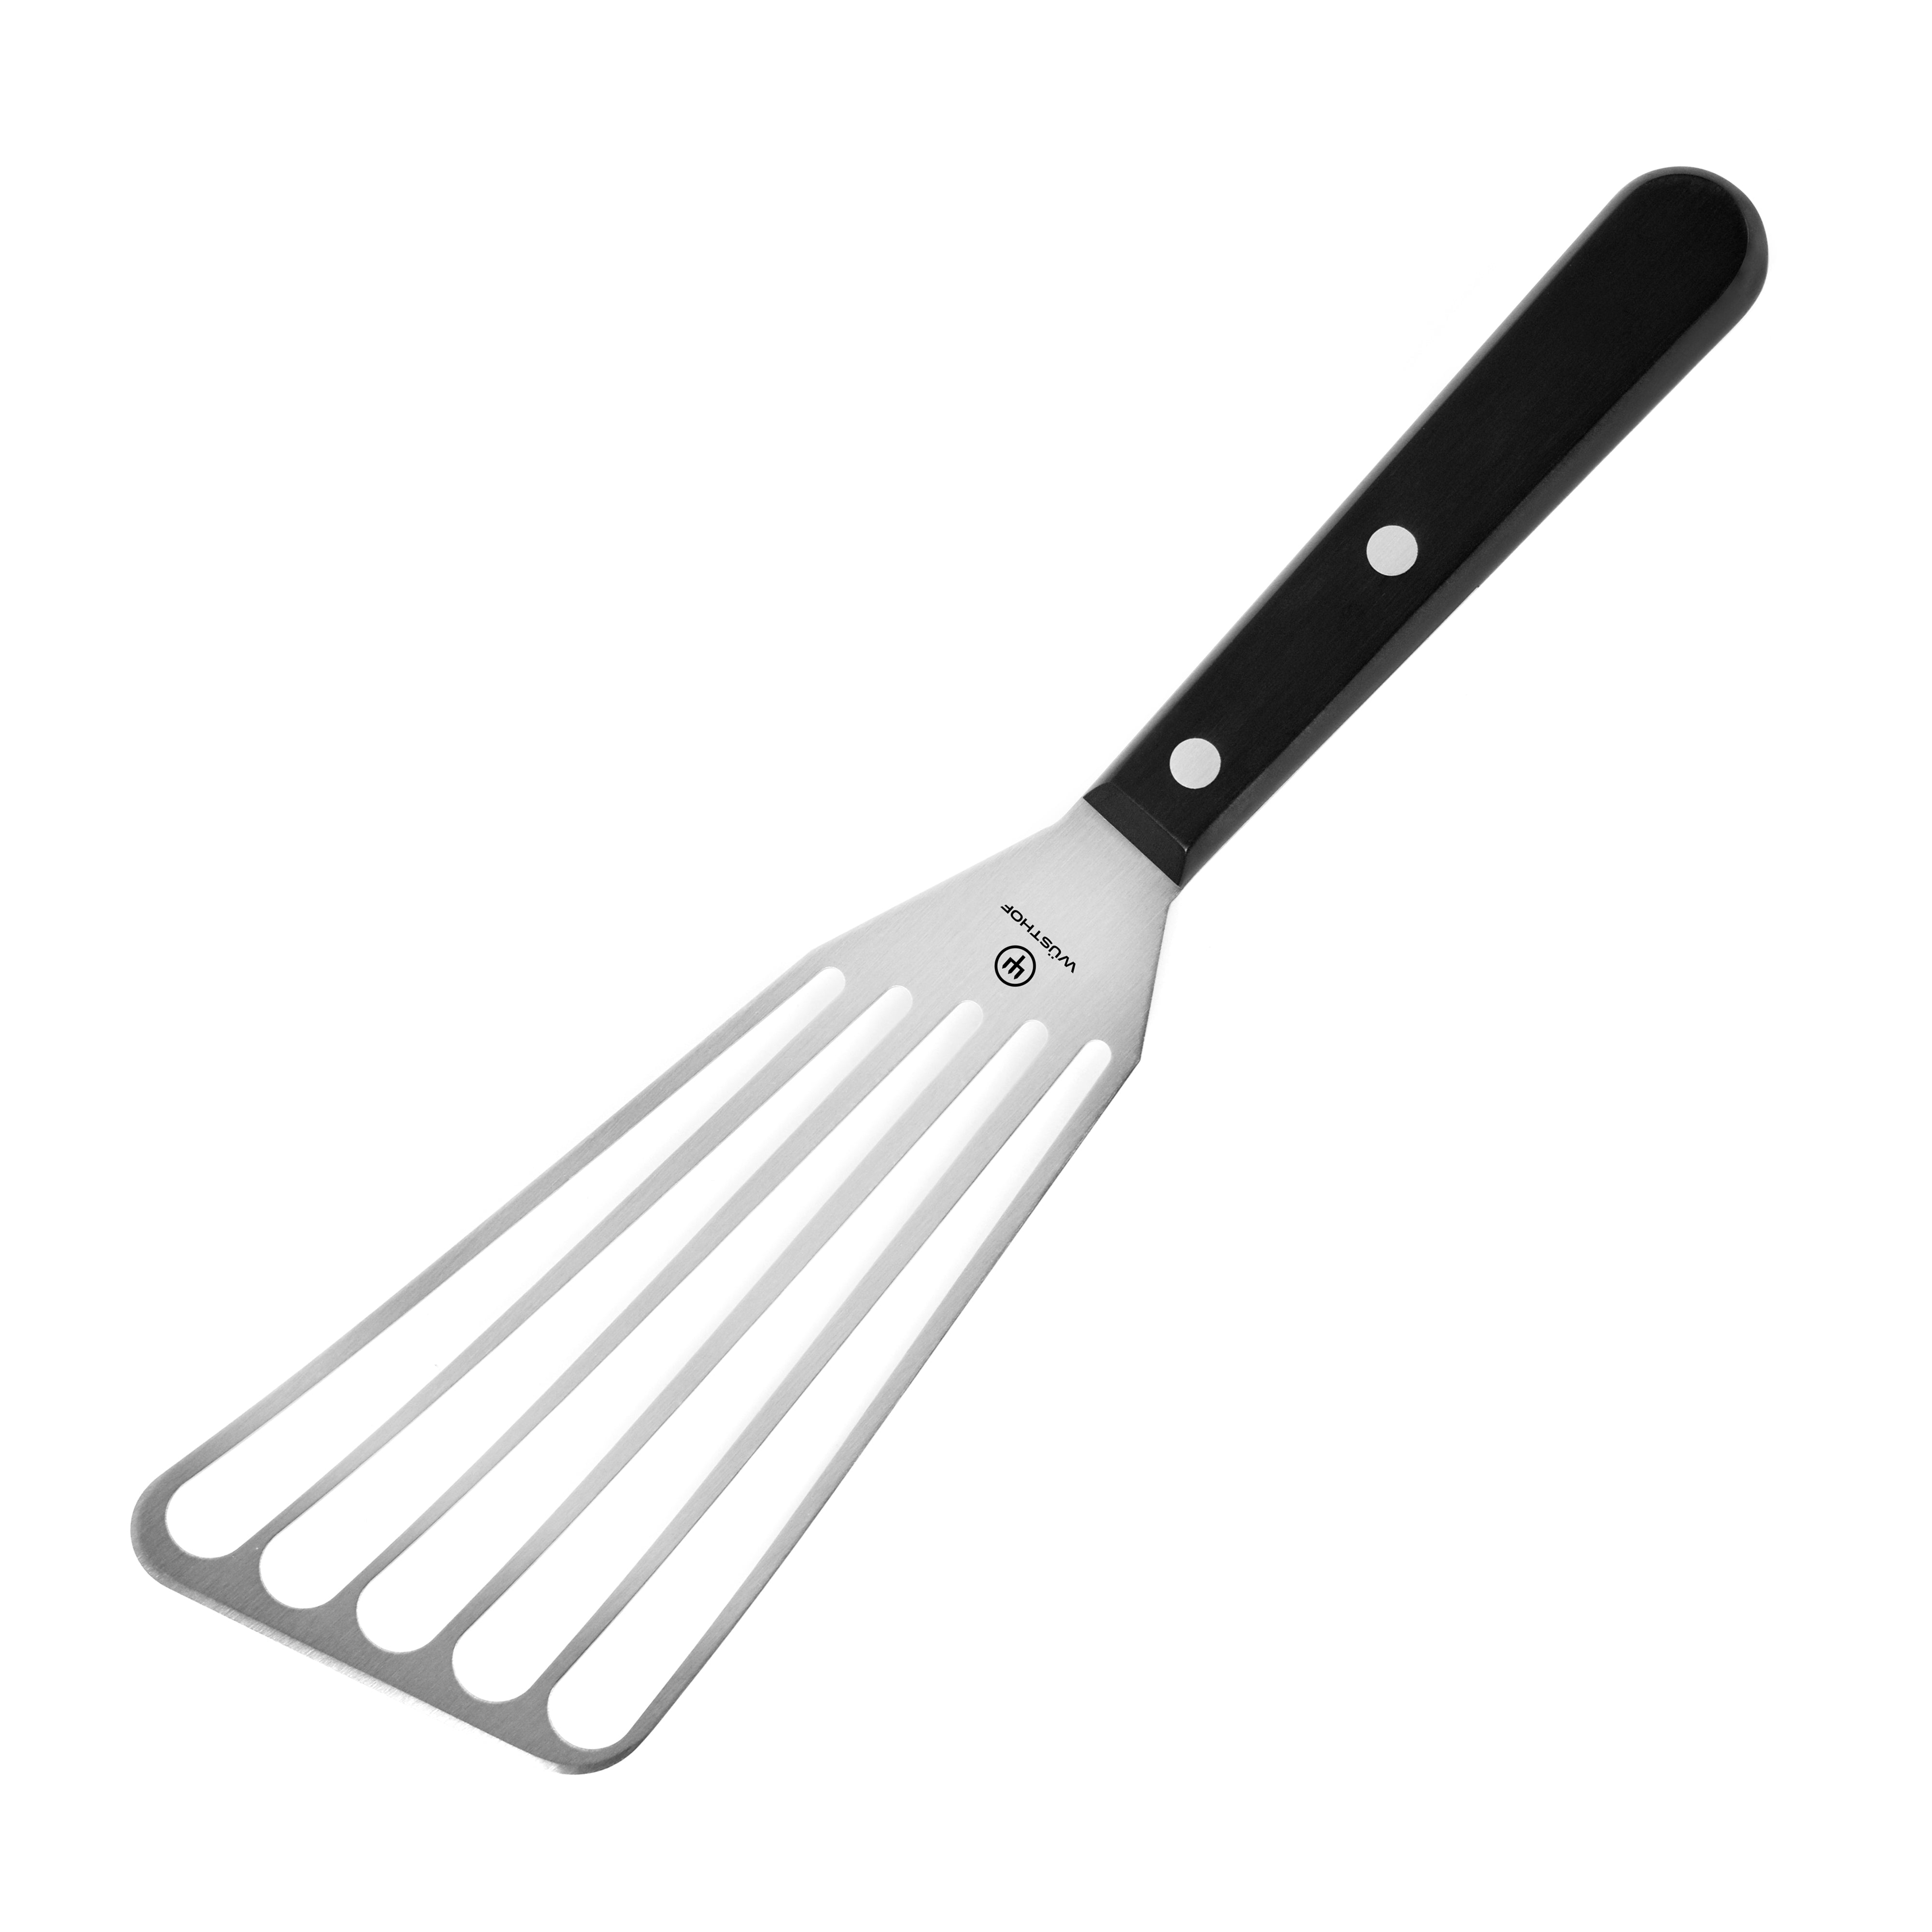 kunghei Fish Spatula - Stainless Steel Slotted Offset Turner with Pakka Wood Handle